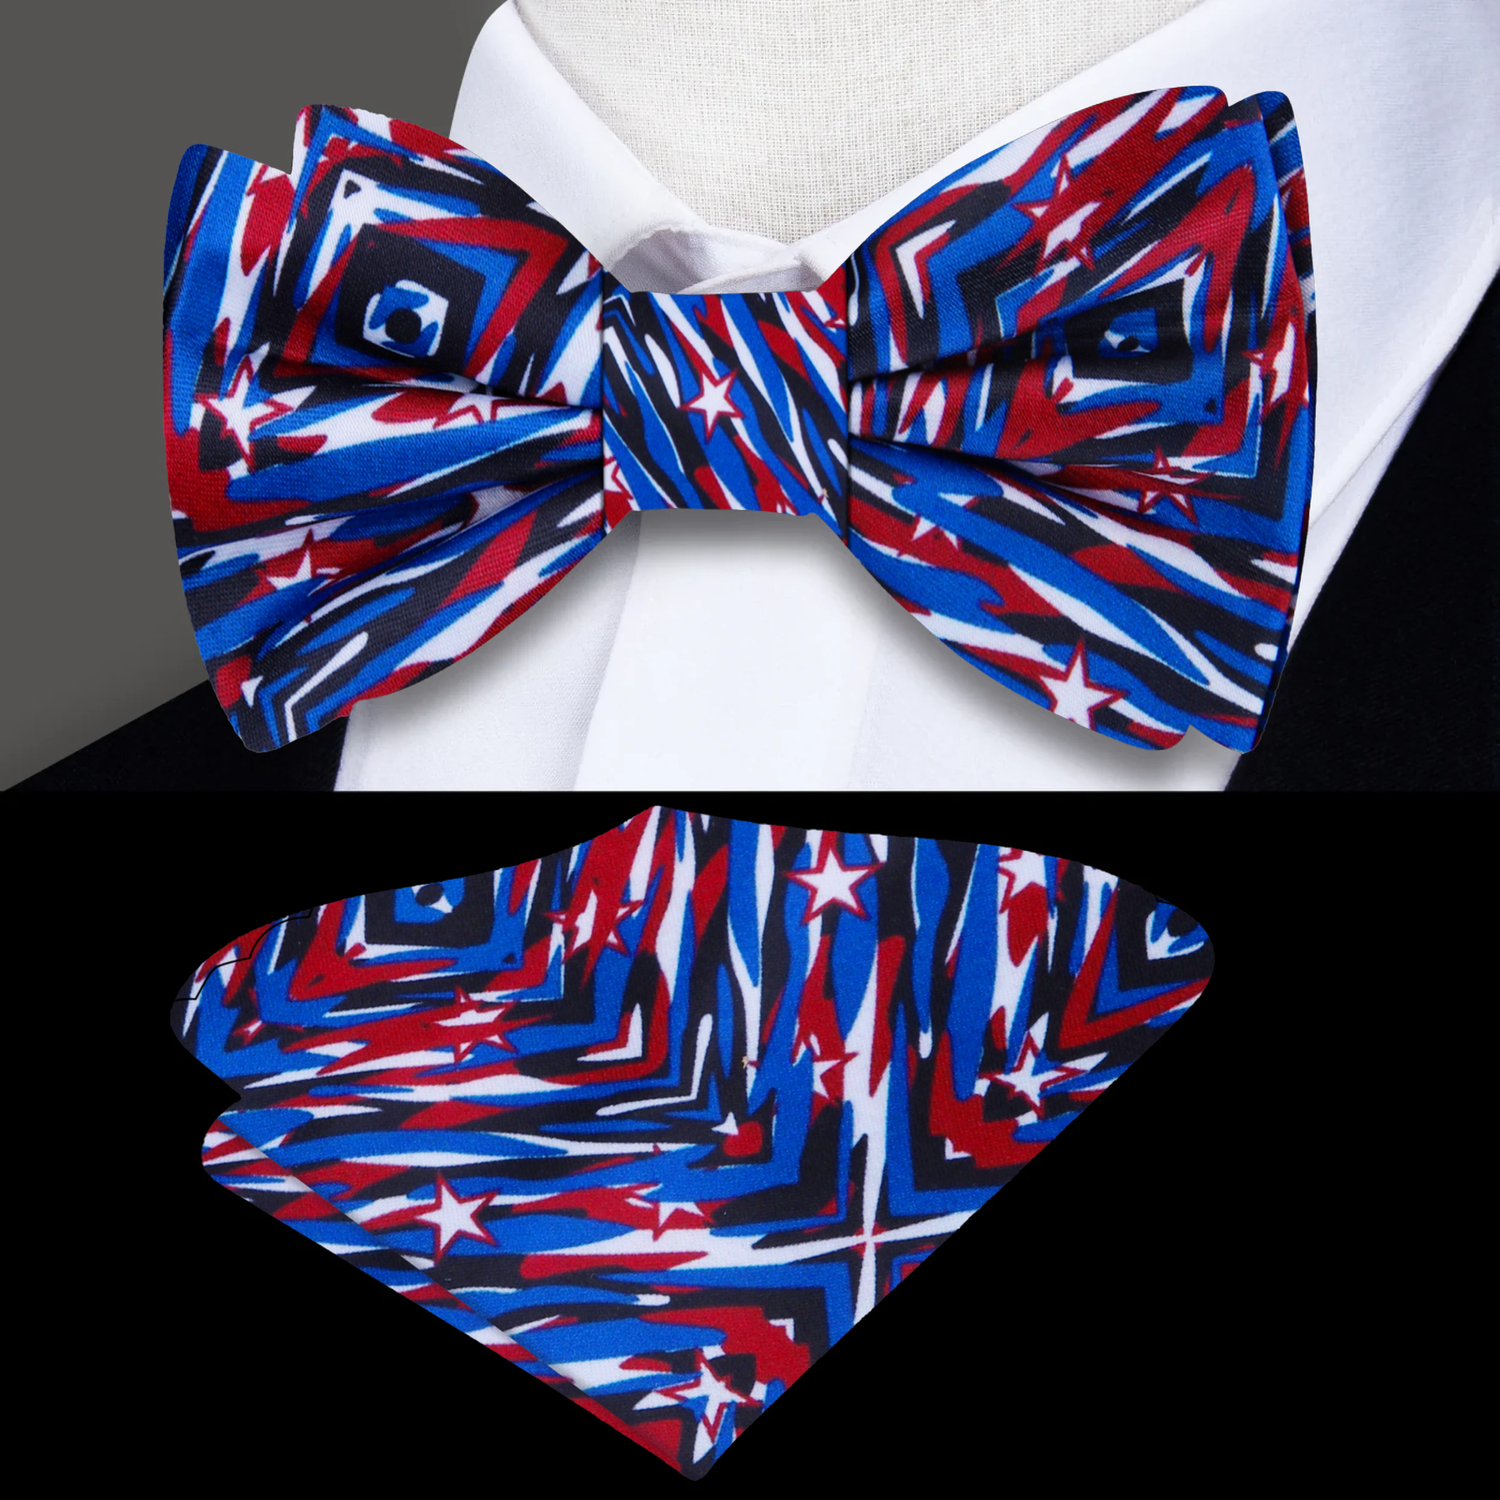 Blue, Red, Black White Abstract Shapes and Stars Bow Tie and Pocket SquareBlue, Red, Black White Abstract Shapes and Stars Bow Tie and Pocket Square